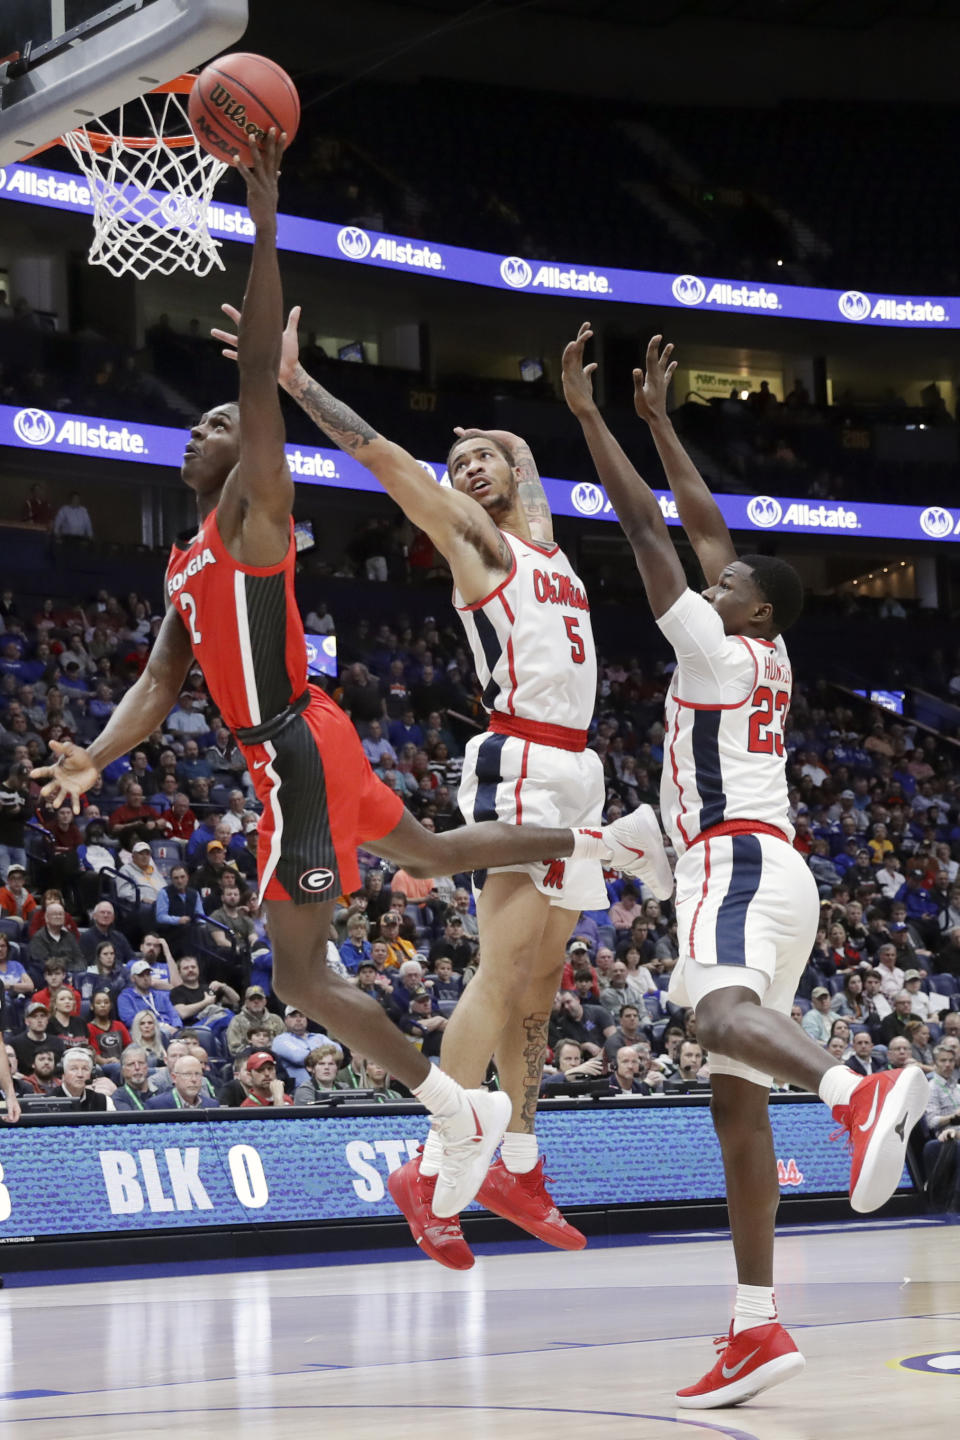 Georgia guard Jordan Harris (2) drives past Mississippi defenders KJ Buffen (5) and Sammy Hunter (23) in the first half of an NCAA college basketball game in the Southeastern Conference Tournament Wednesday, March 11, 2020, in Nashville, Tenn. (AP Photo/Mark Humphrey)